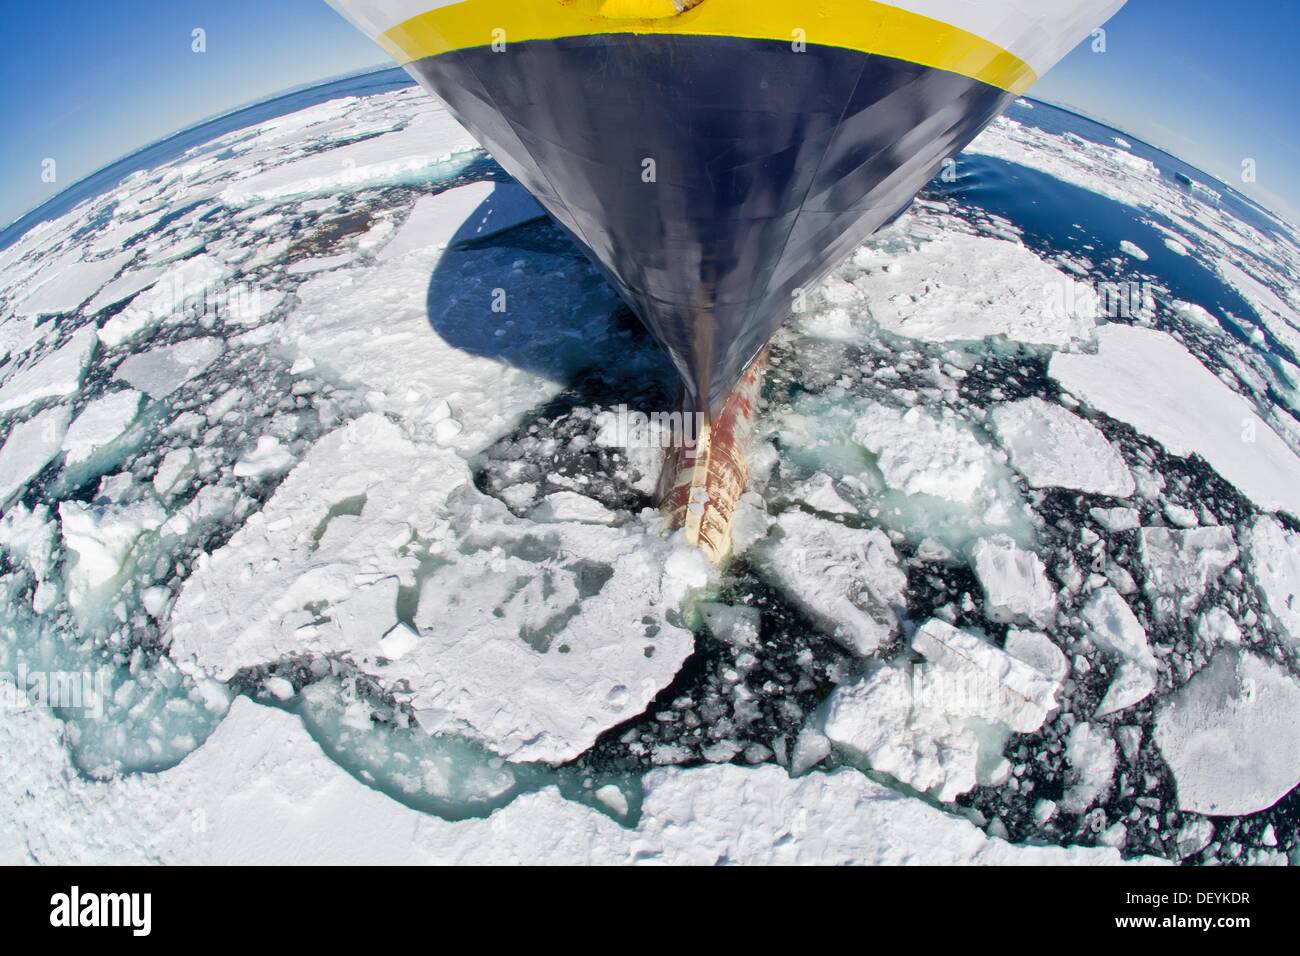 The Lindblad Expedition ship National Geographic Explorer on expedition in Antarctica Stock Photo